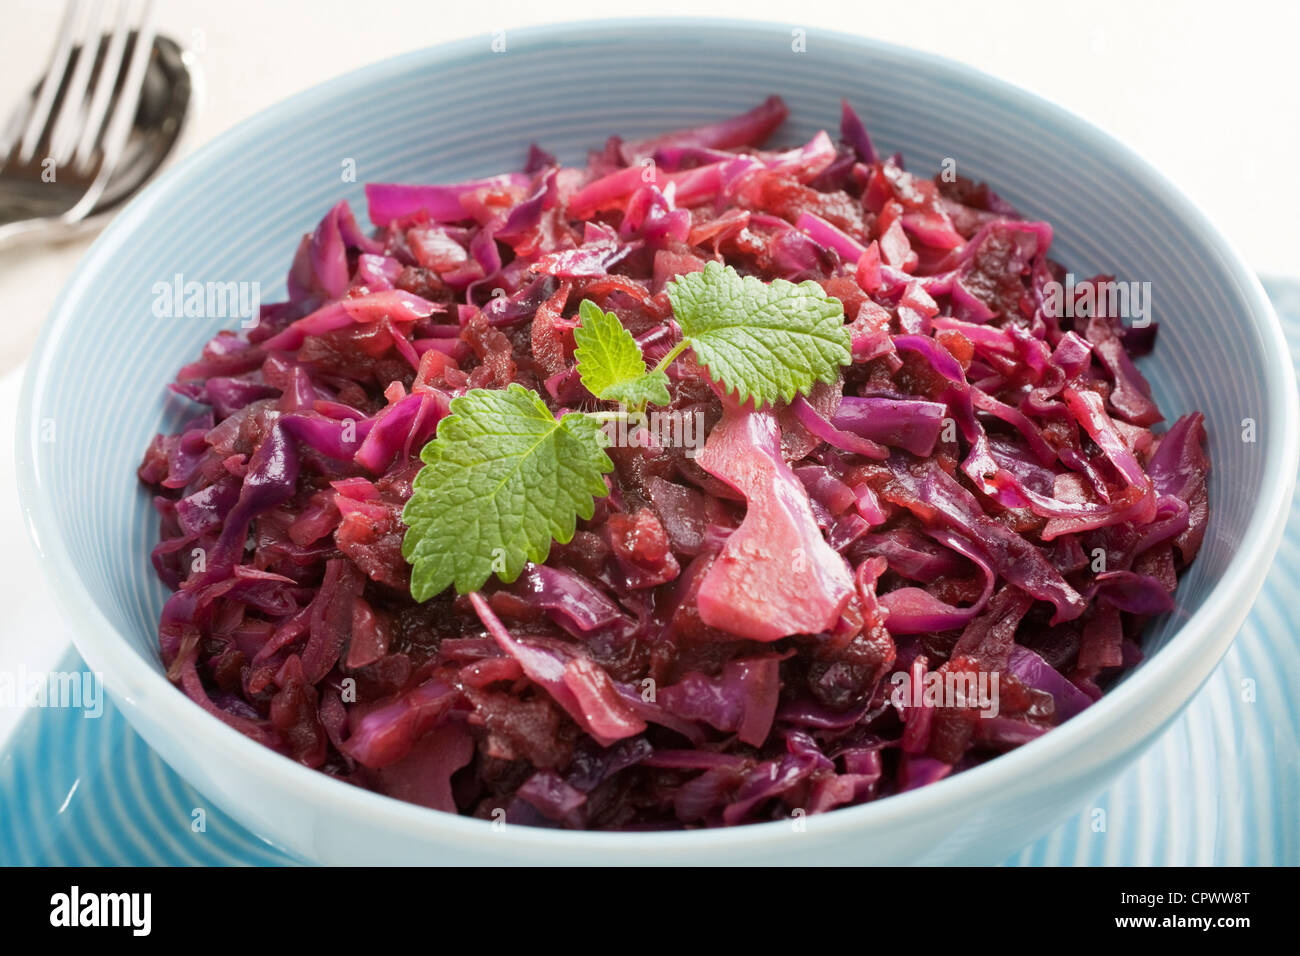 Spiced red cabbage with apple Stock Photo